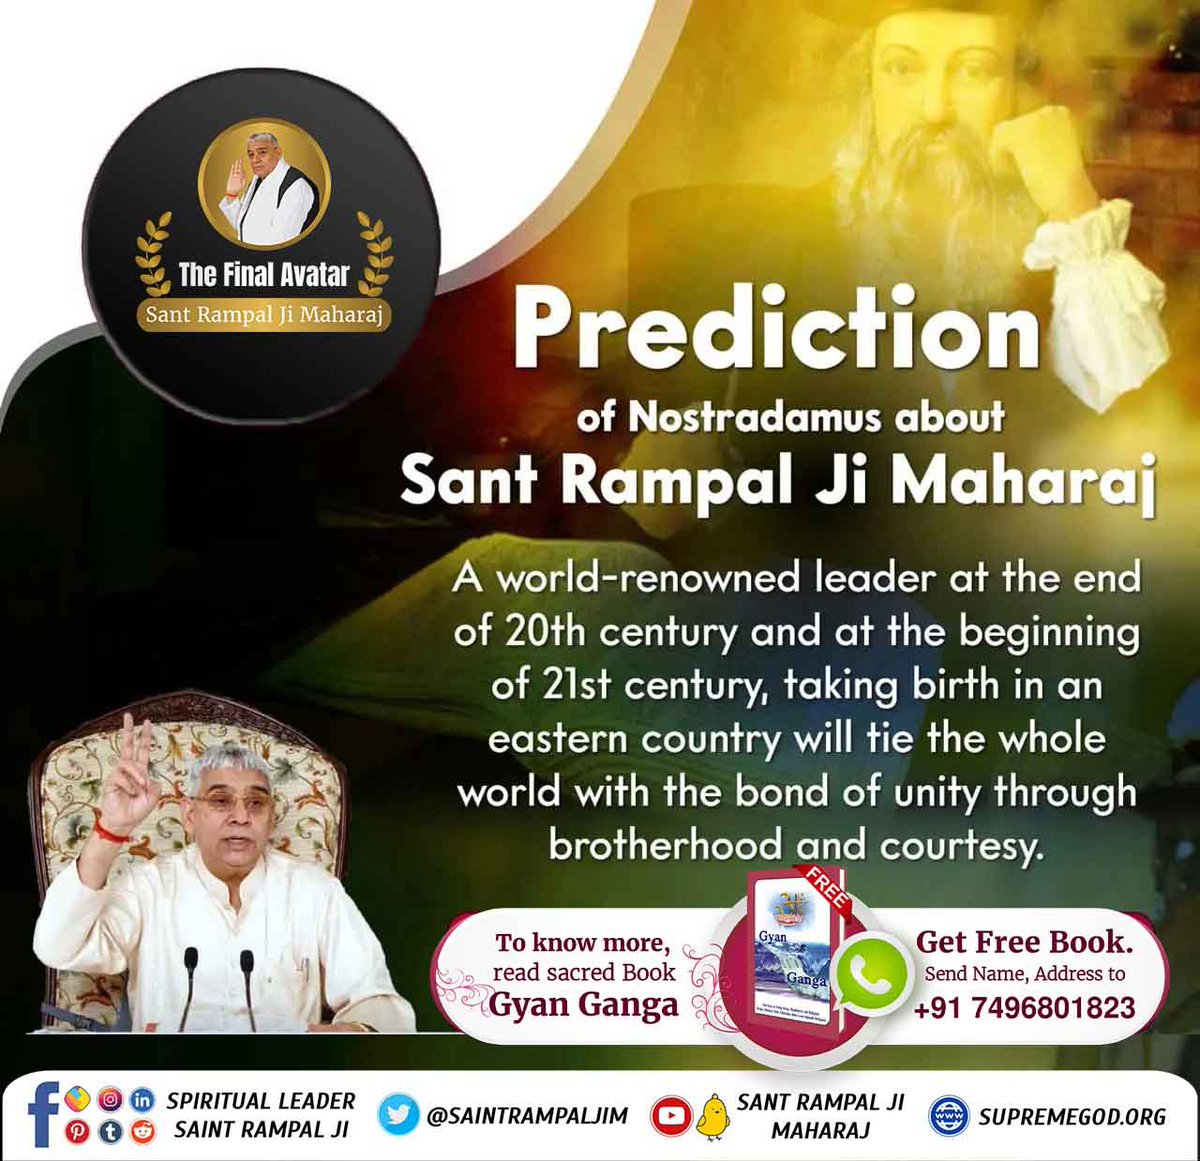 #आदि_सनातनधर्म_होगाप्रतिष्ठित Prediction of Nostradamus about Sant Rampal Ji Maharaj A world-renowned leader at the end of 20th century and at the beginning of 21st century,